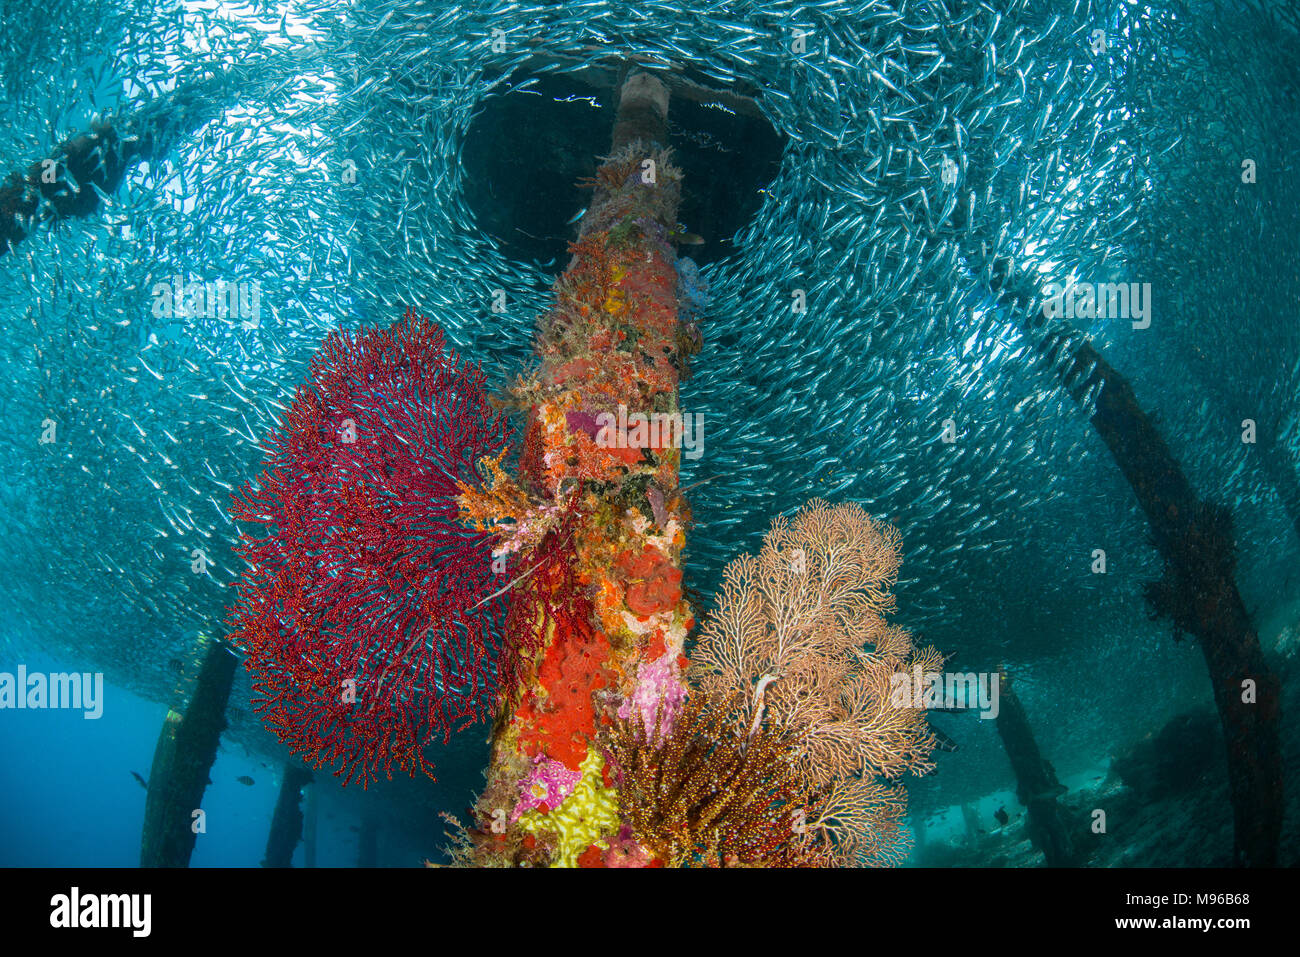 Schooling fish underneath a jetty, with sea fans on the columns, at Arborek Island, Raja Ampat Marine Park, West Papua, Indonesia. Stock Photo